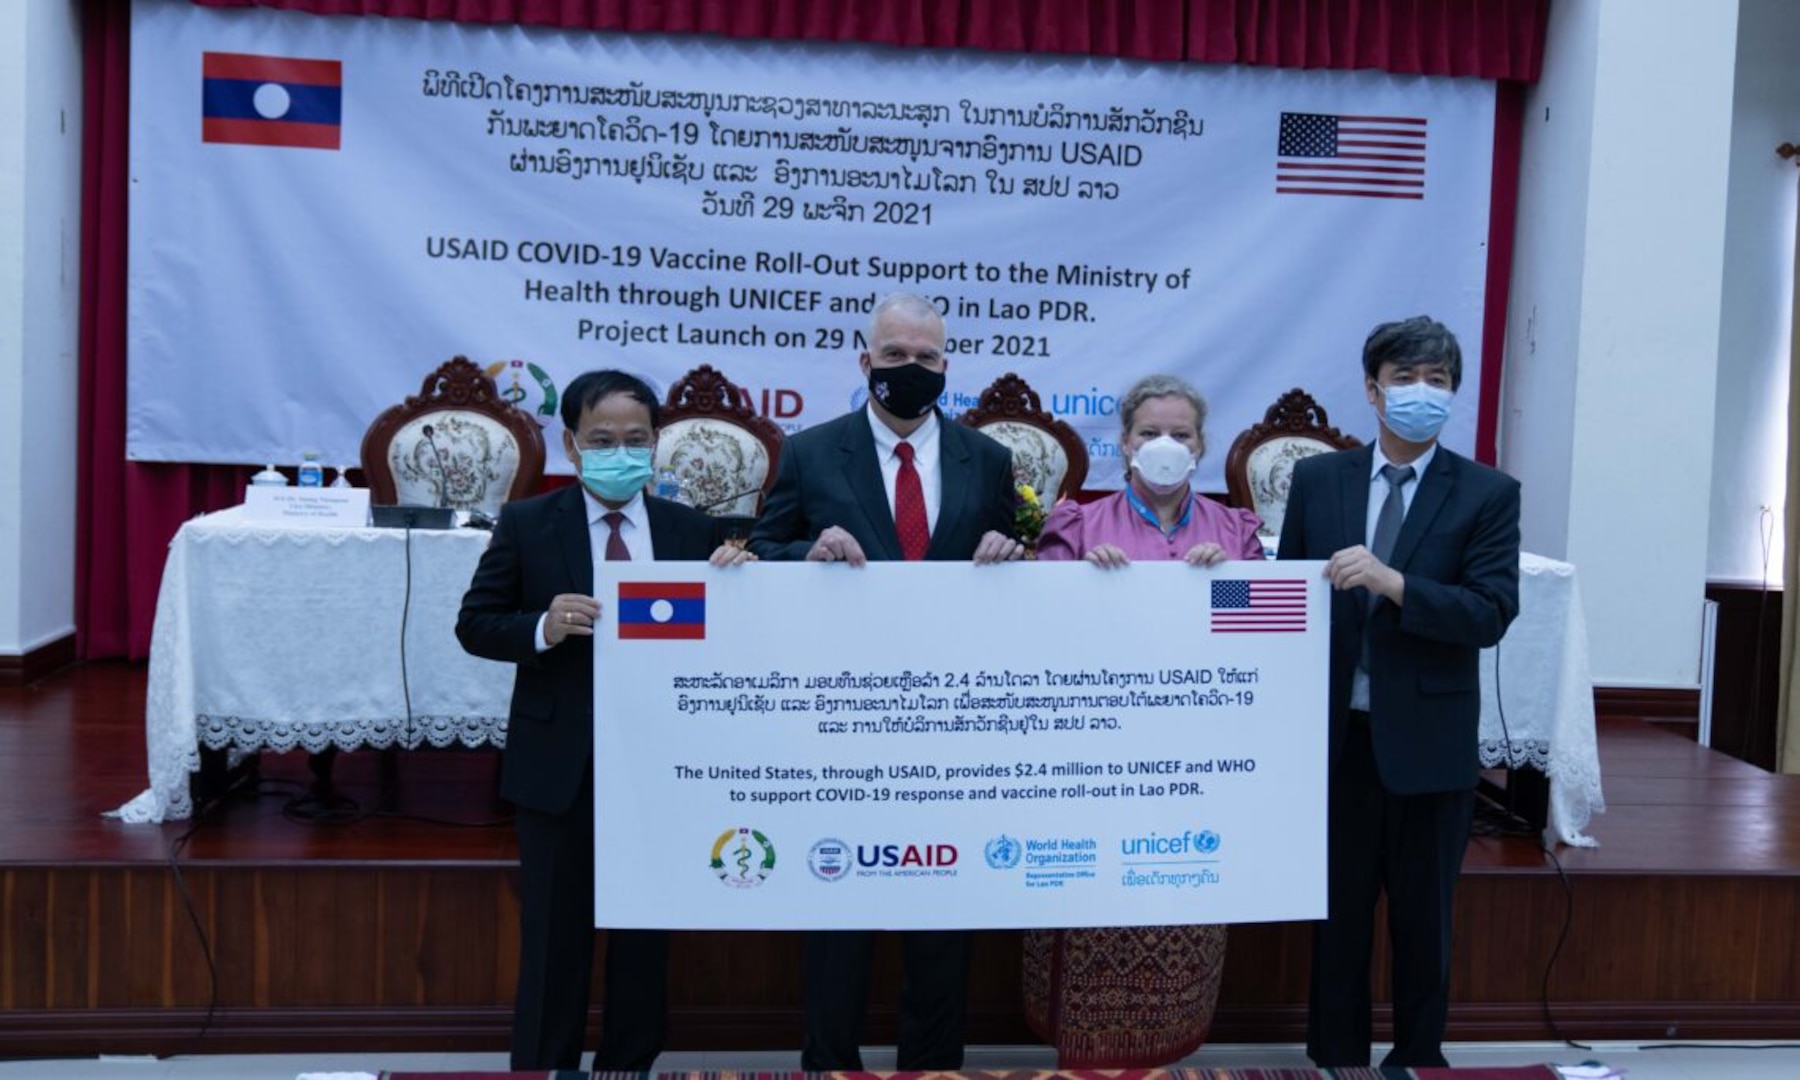 Grant of 2.4 Million $ to Support COVID-19 Vaccination in Laos